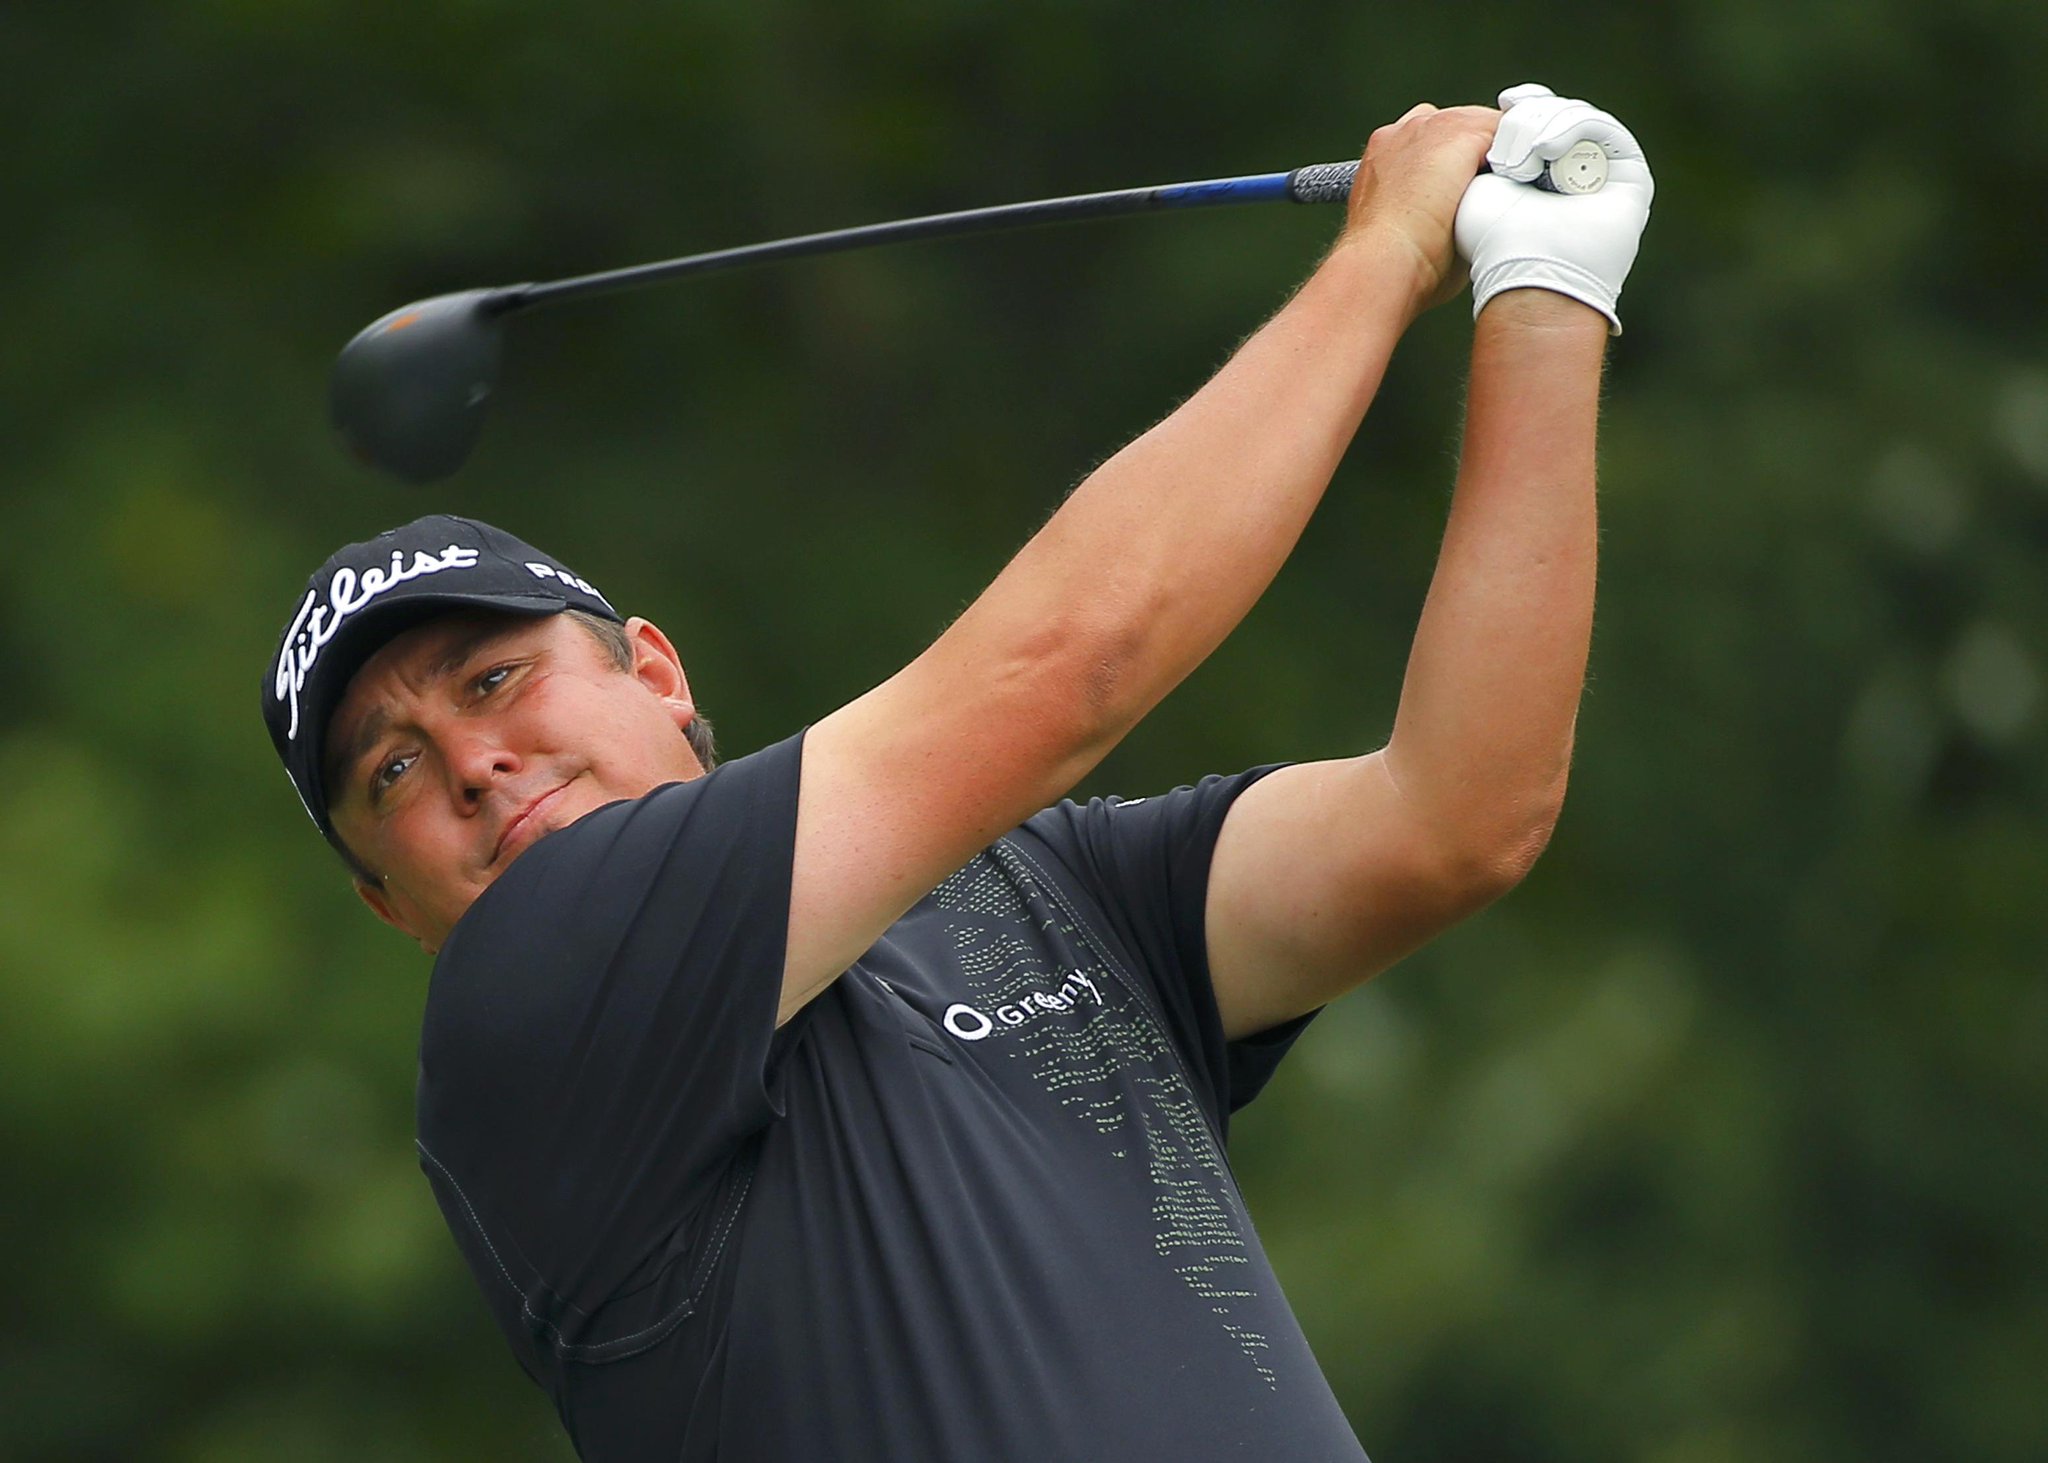 To wish Jason Dufner a Happy 38th Birthday! 